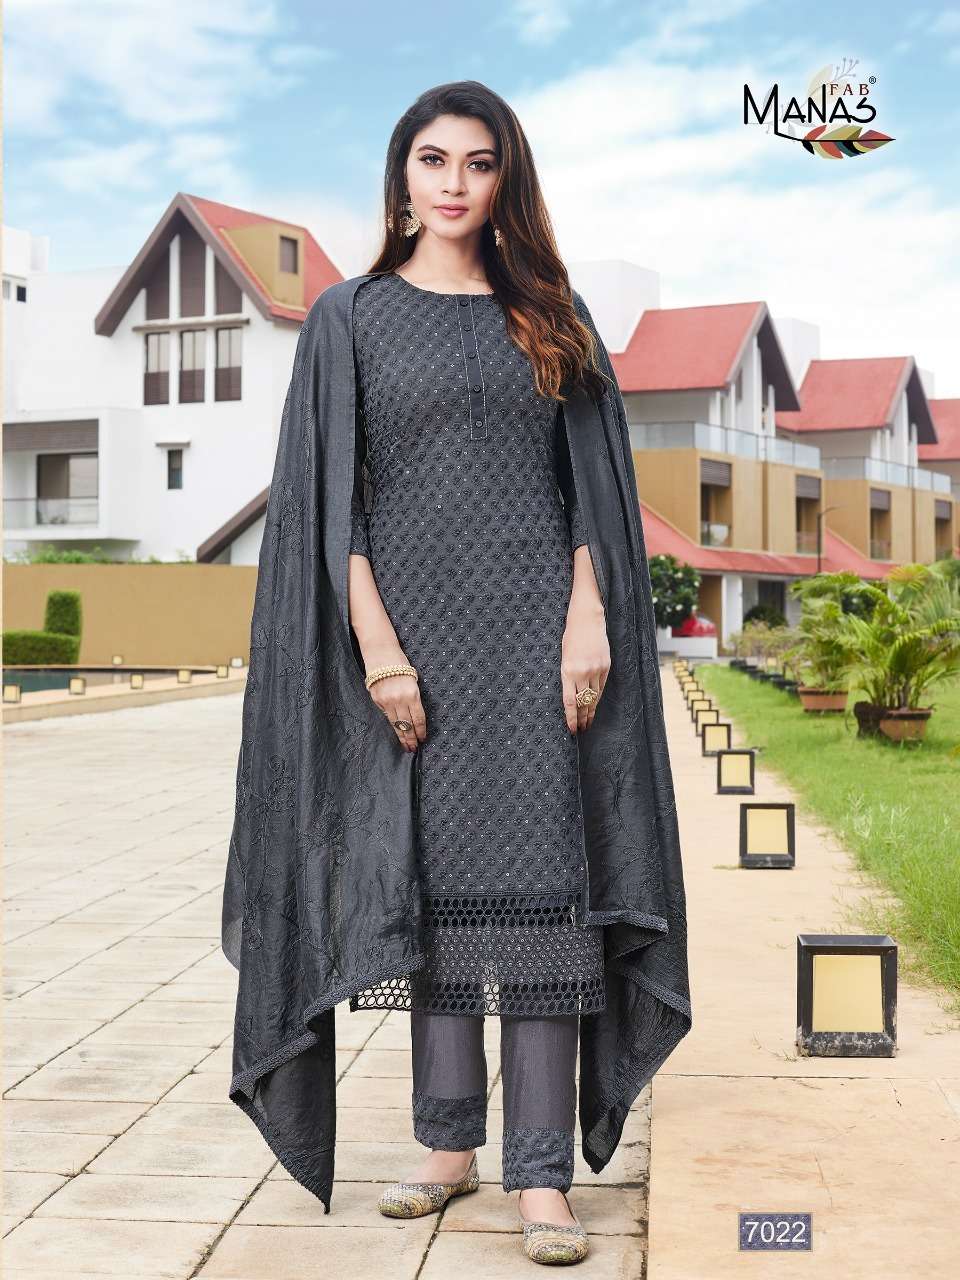 MANAS FAB PRESENTS SCHIFFLI VOL 4 GEORGETTE WHOLESALE READYMADE COLLECTION